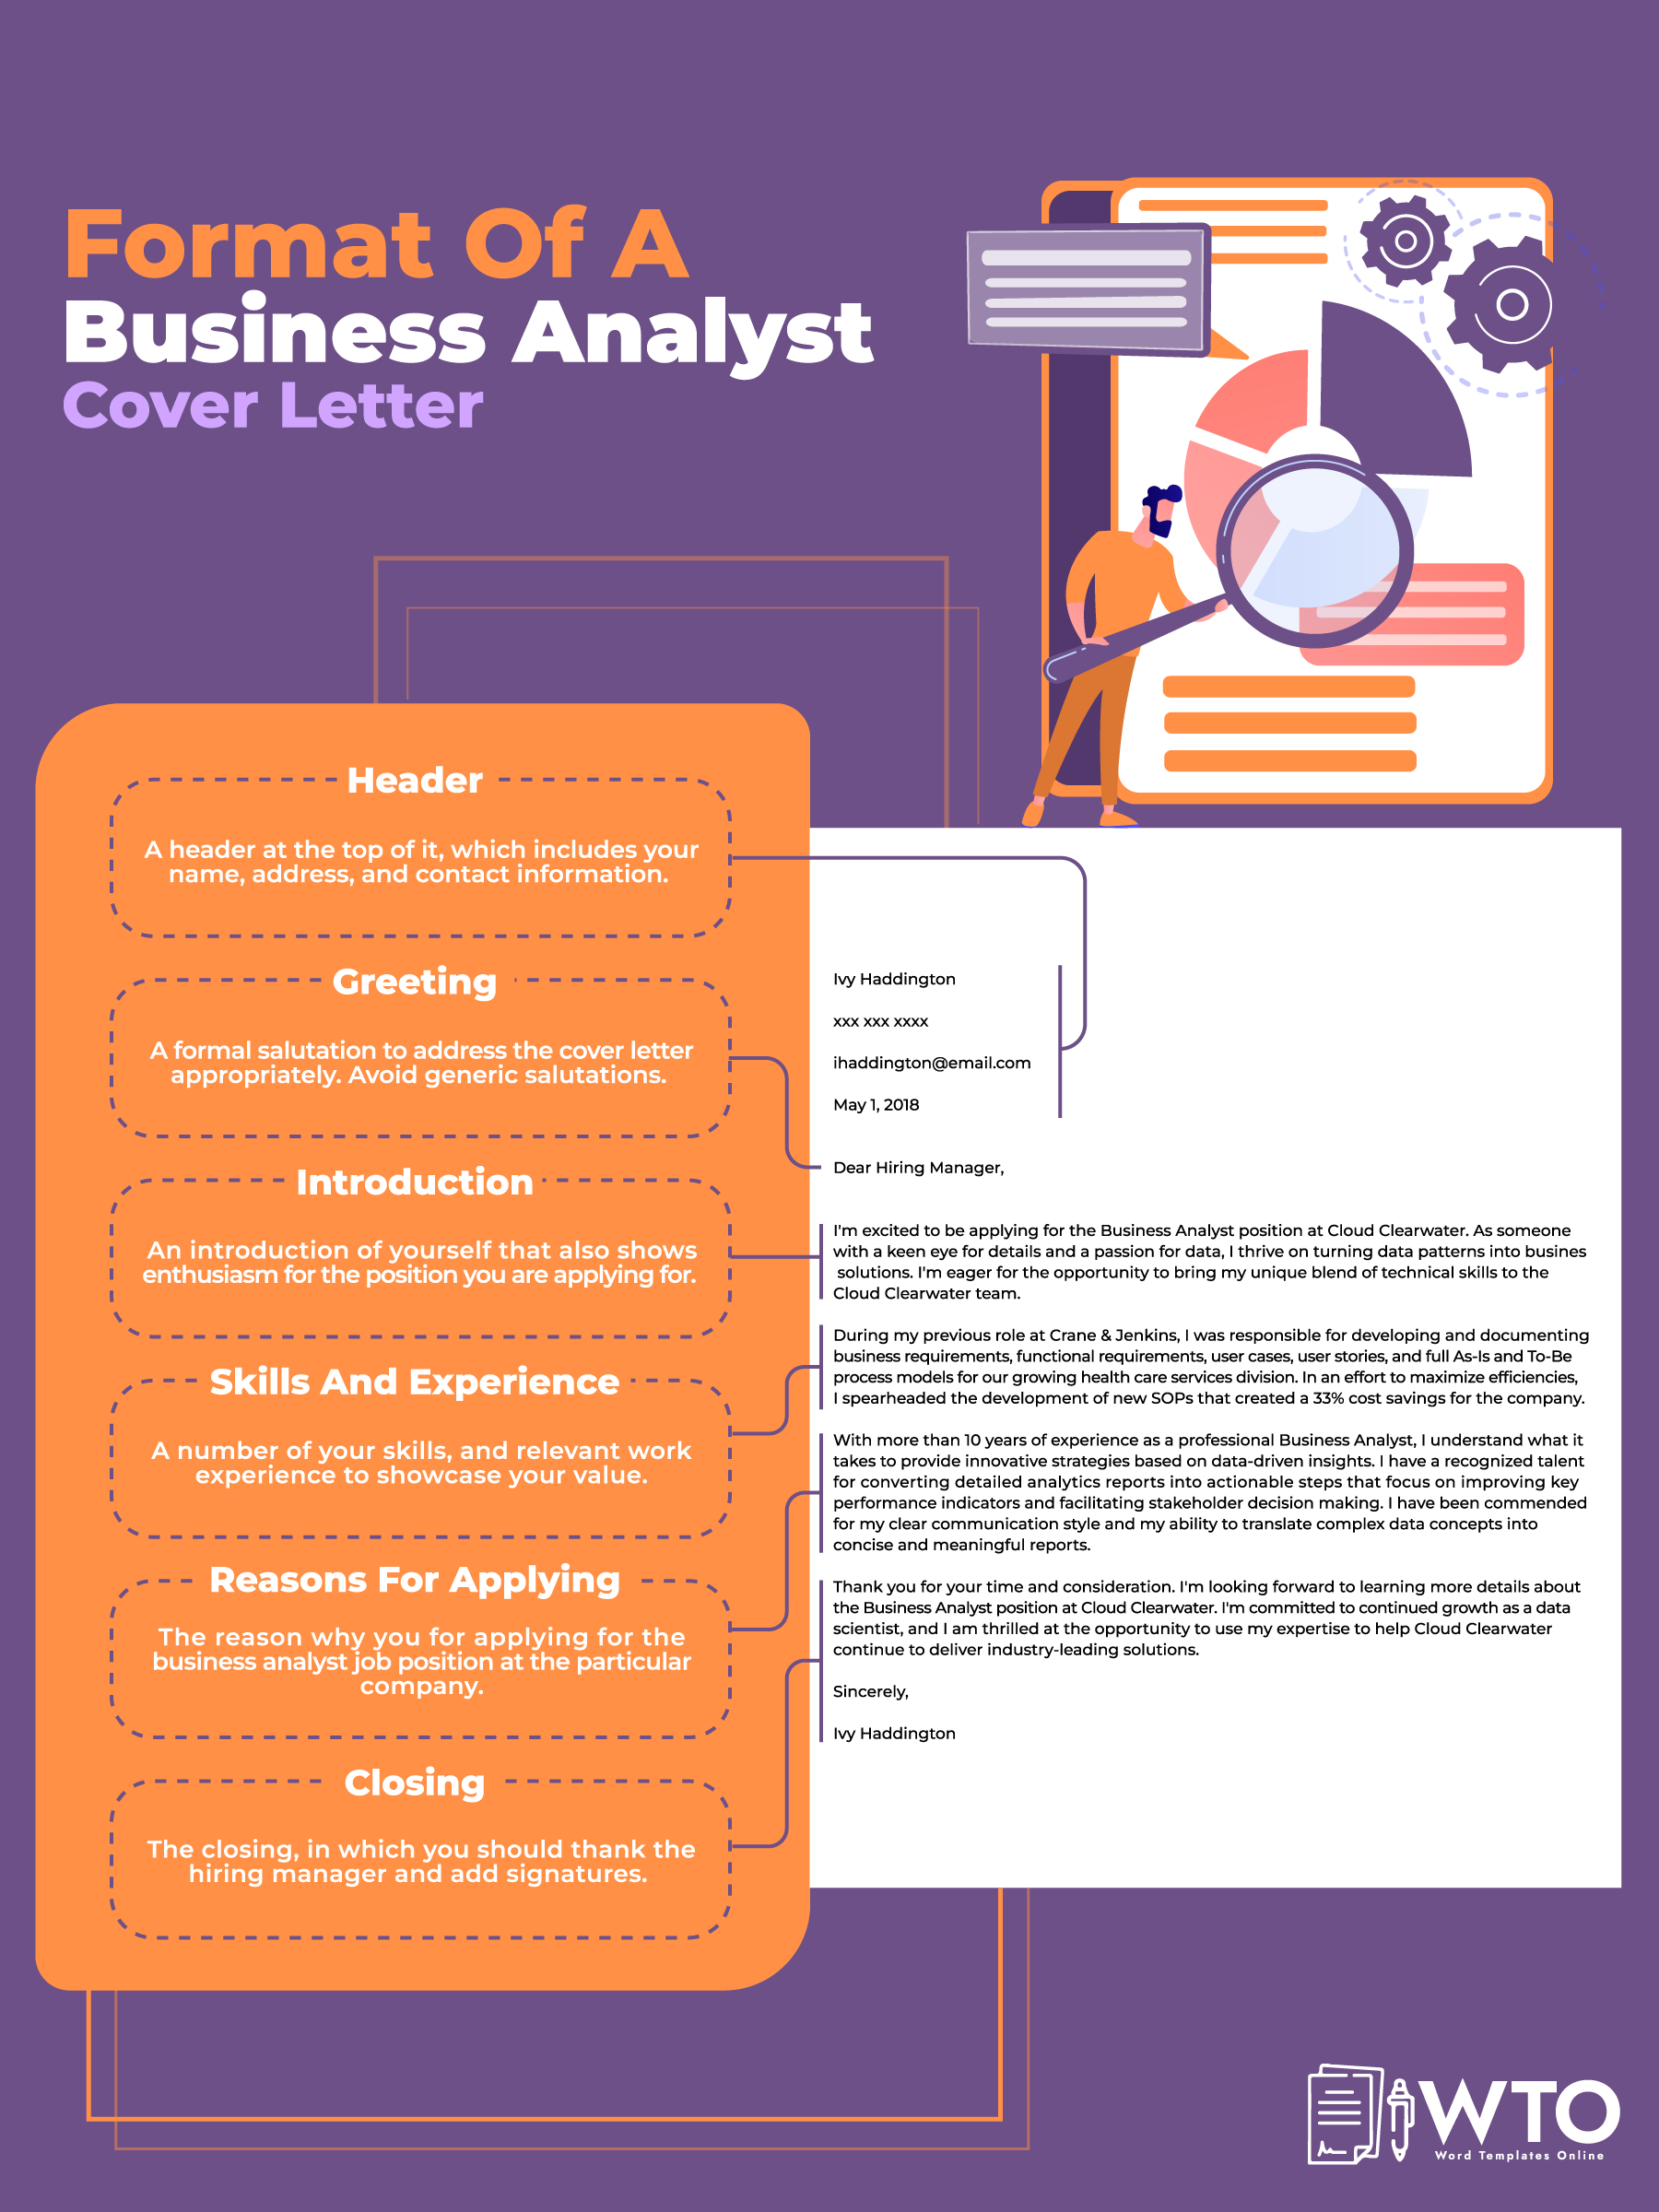 This infographic tells the format of a business analyst cover letter.